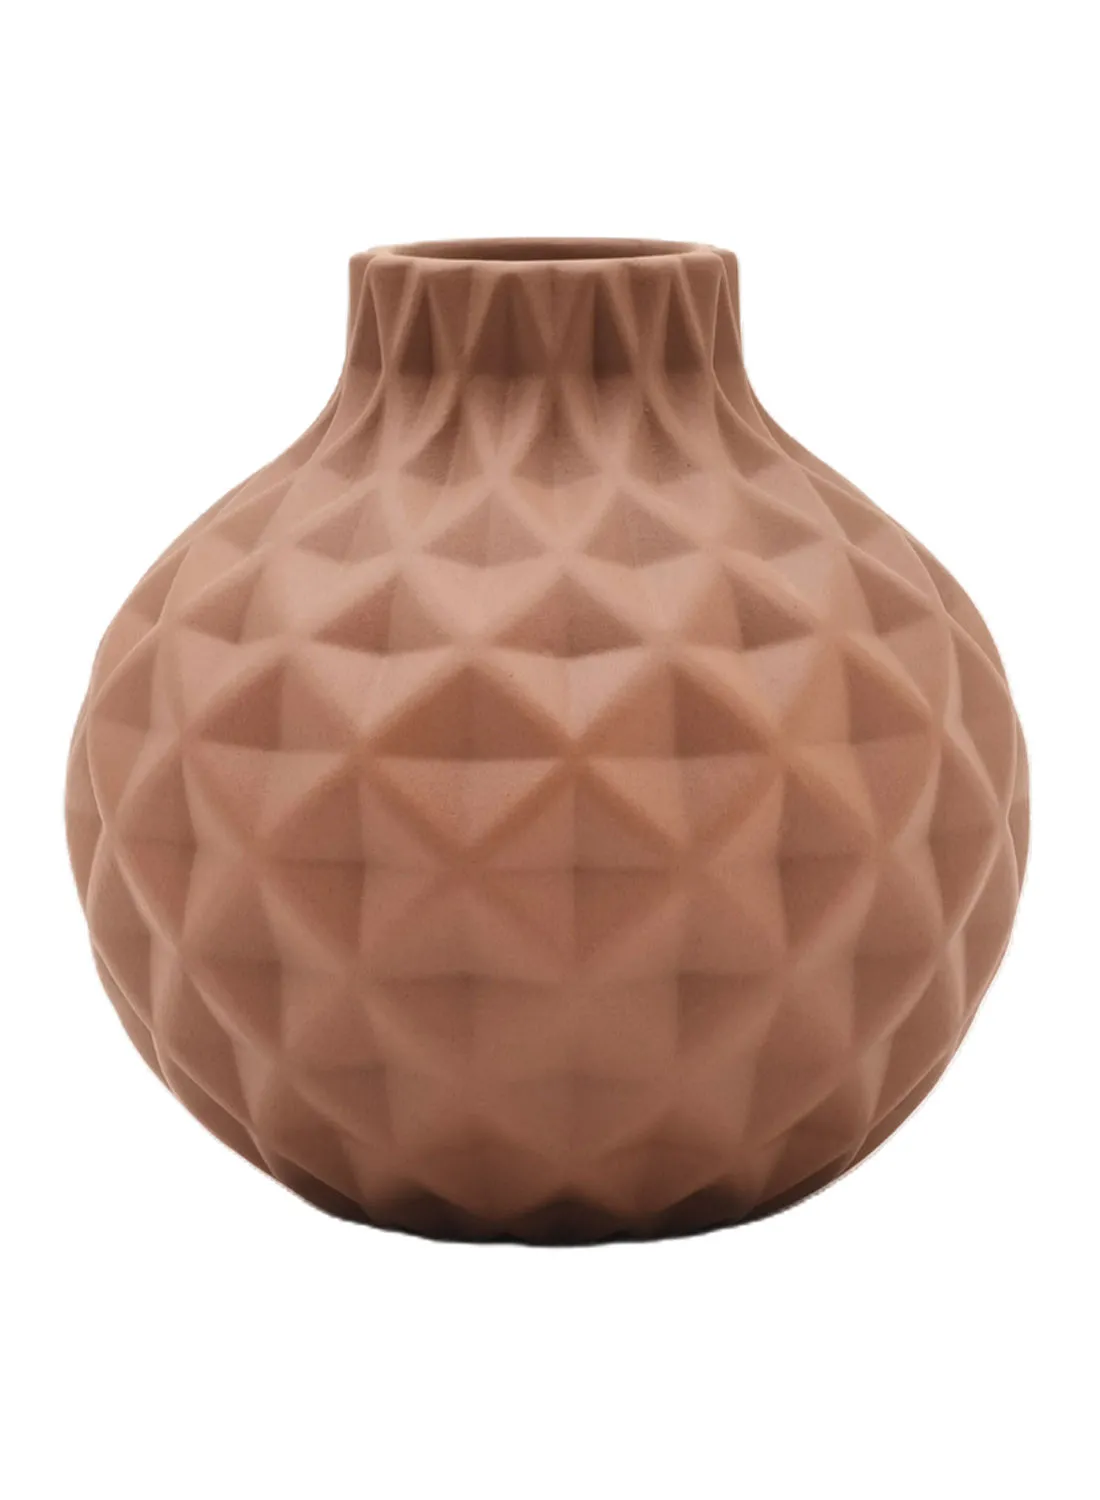 ebb & flow Textured Geometric Pattern Ceramic Vase Unique Luxury Quality Material For The Perfect Stylish Home N13-030 Brown 23.5 x 24.5cm